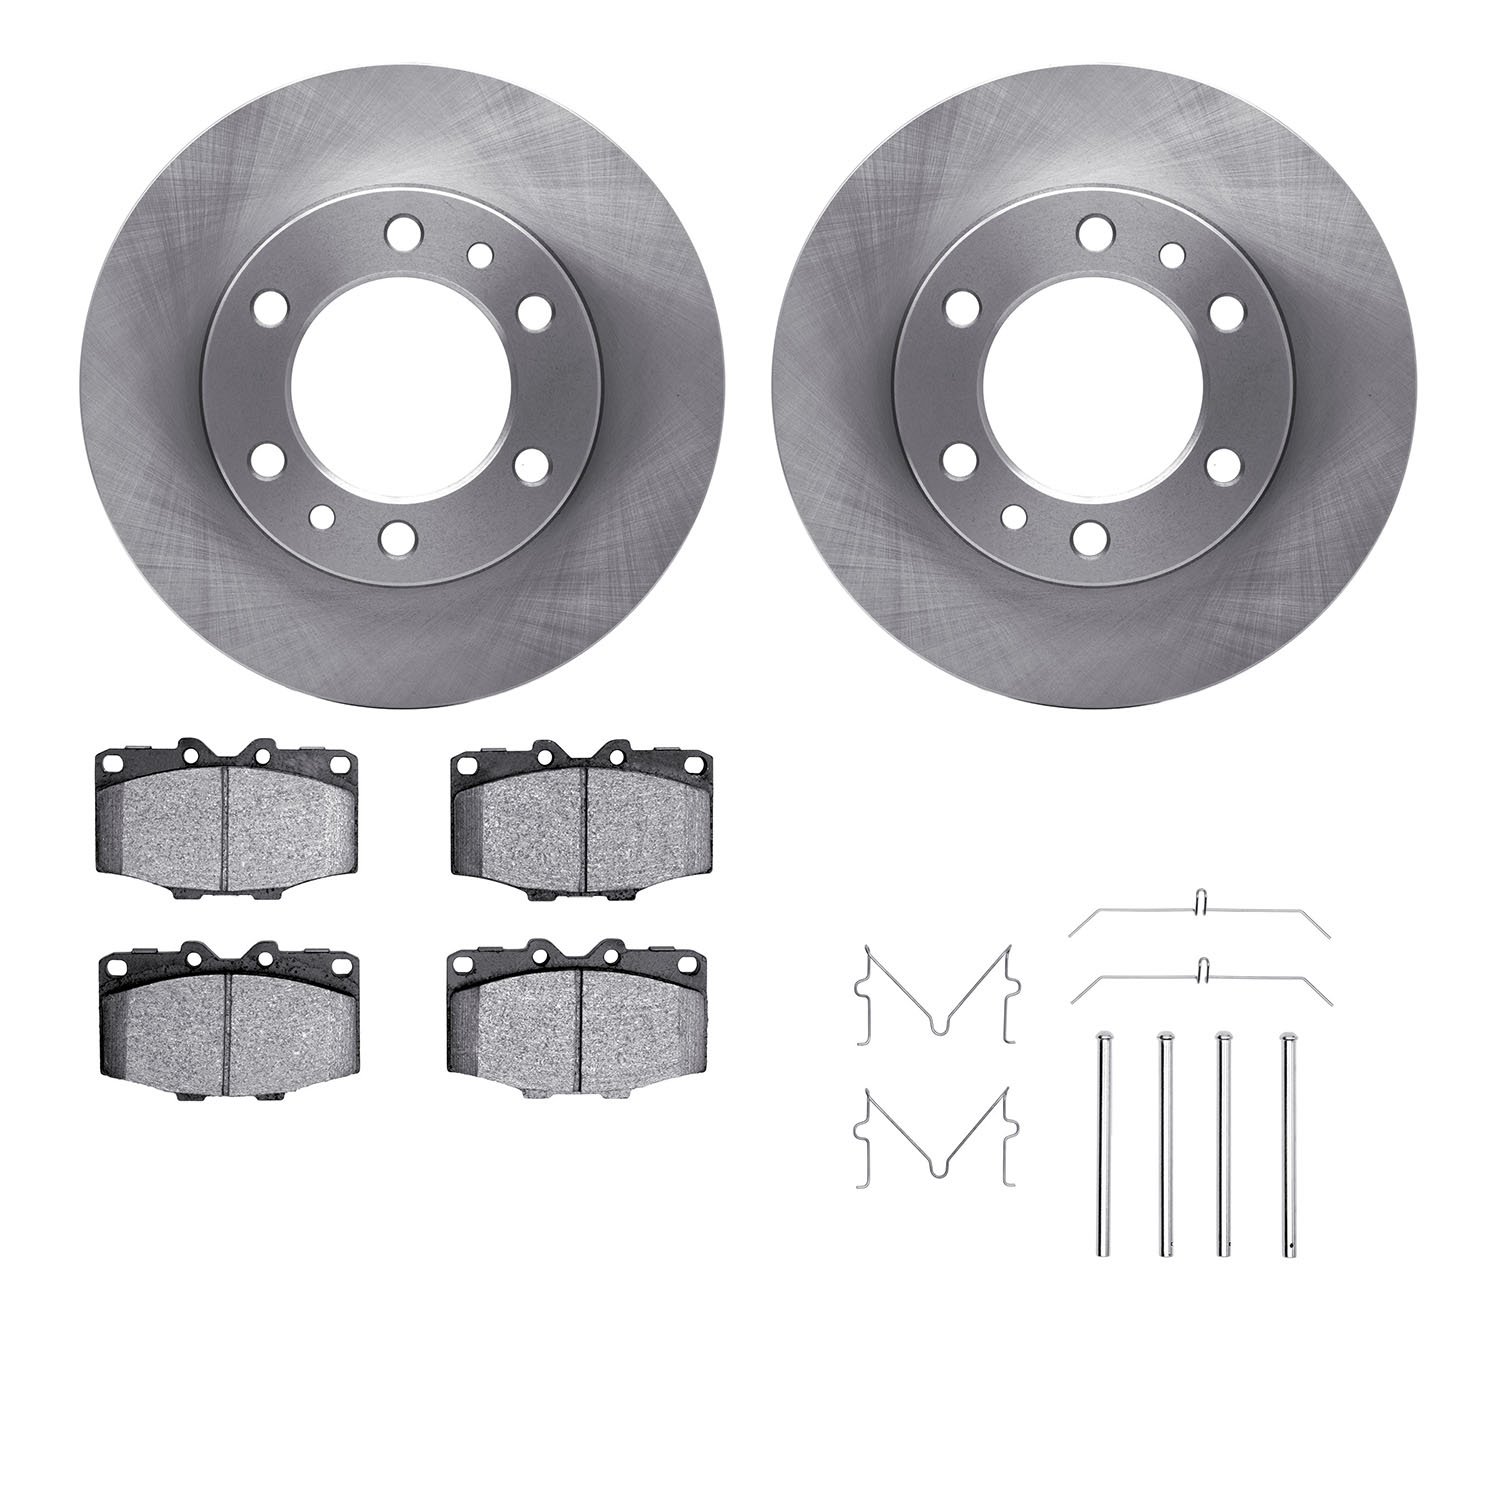 6412-76013 Brake Rotors with Ultimate-Duty Brake Pads Kit & Hardware, 1981-1989 Lexus/Toyota/Scion, Position: Front